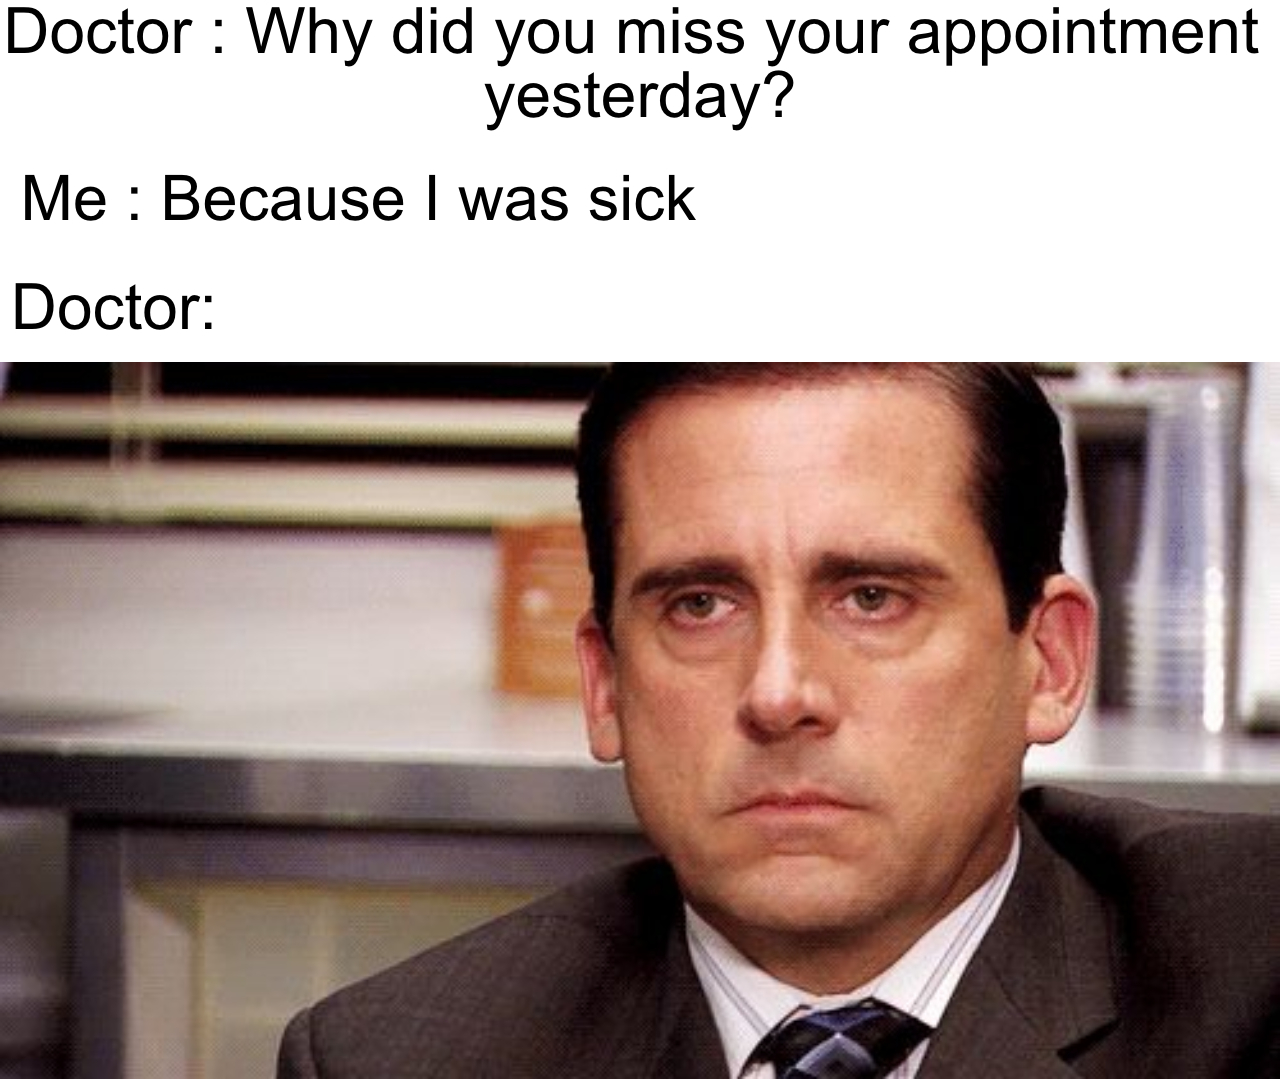 michael scott - Doctor Why did you miss your appointment yesterday? Me Because I was sick Doctor